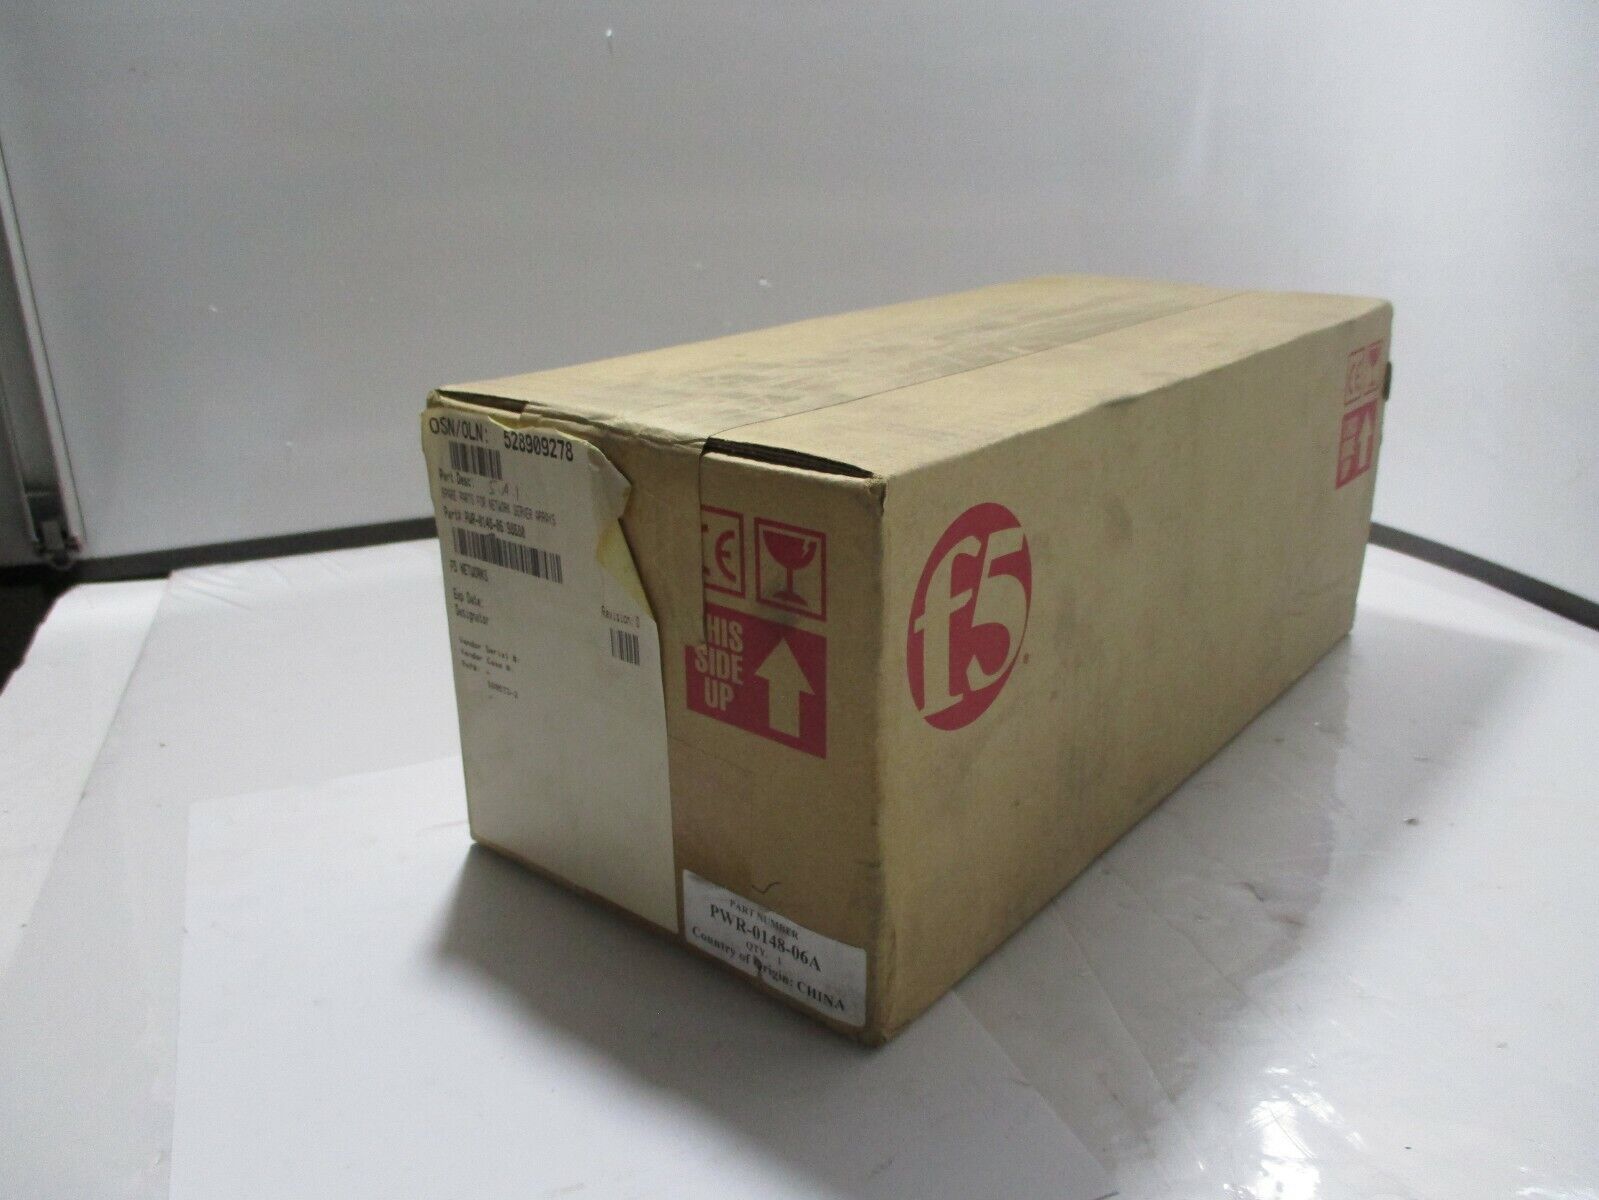 F5 Networks PWR-0148-06A Power-One FNP850-S151G Power Supply 850W